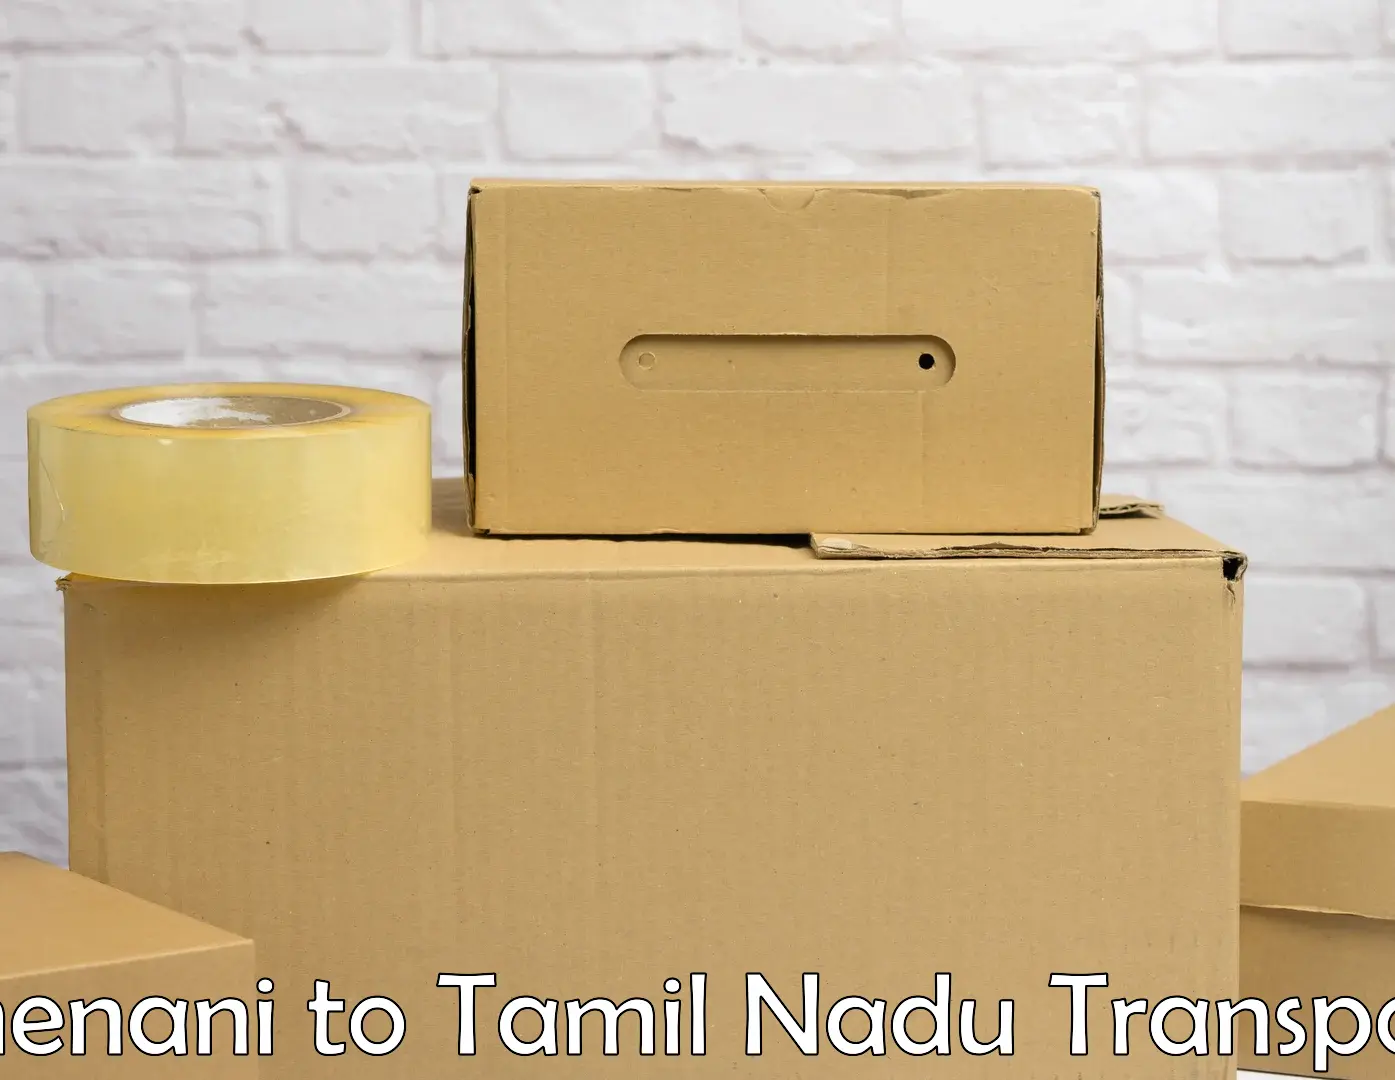 Inland transportation services Chenani to Ennore Port Chennai